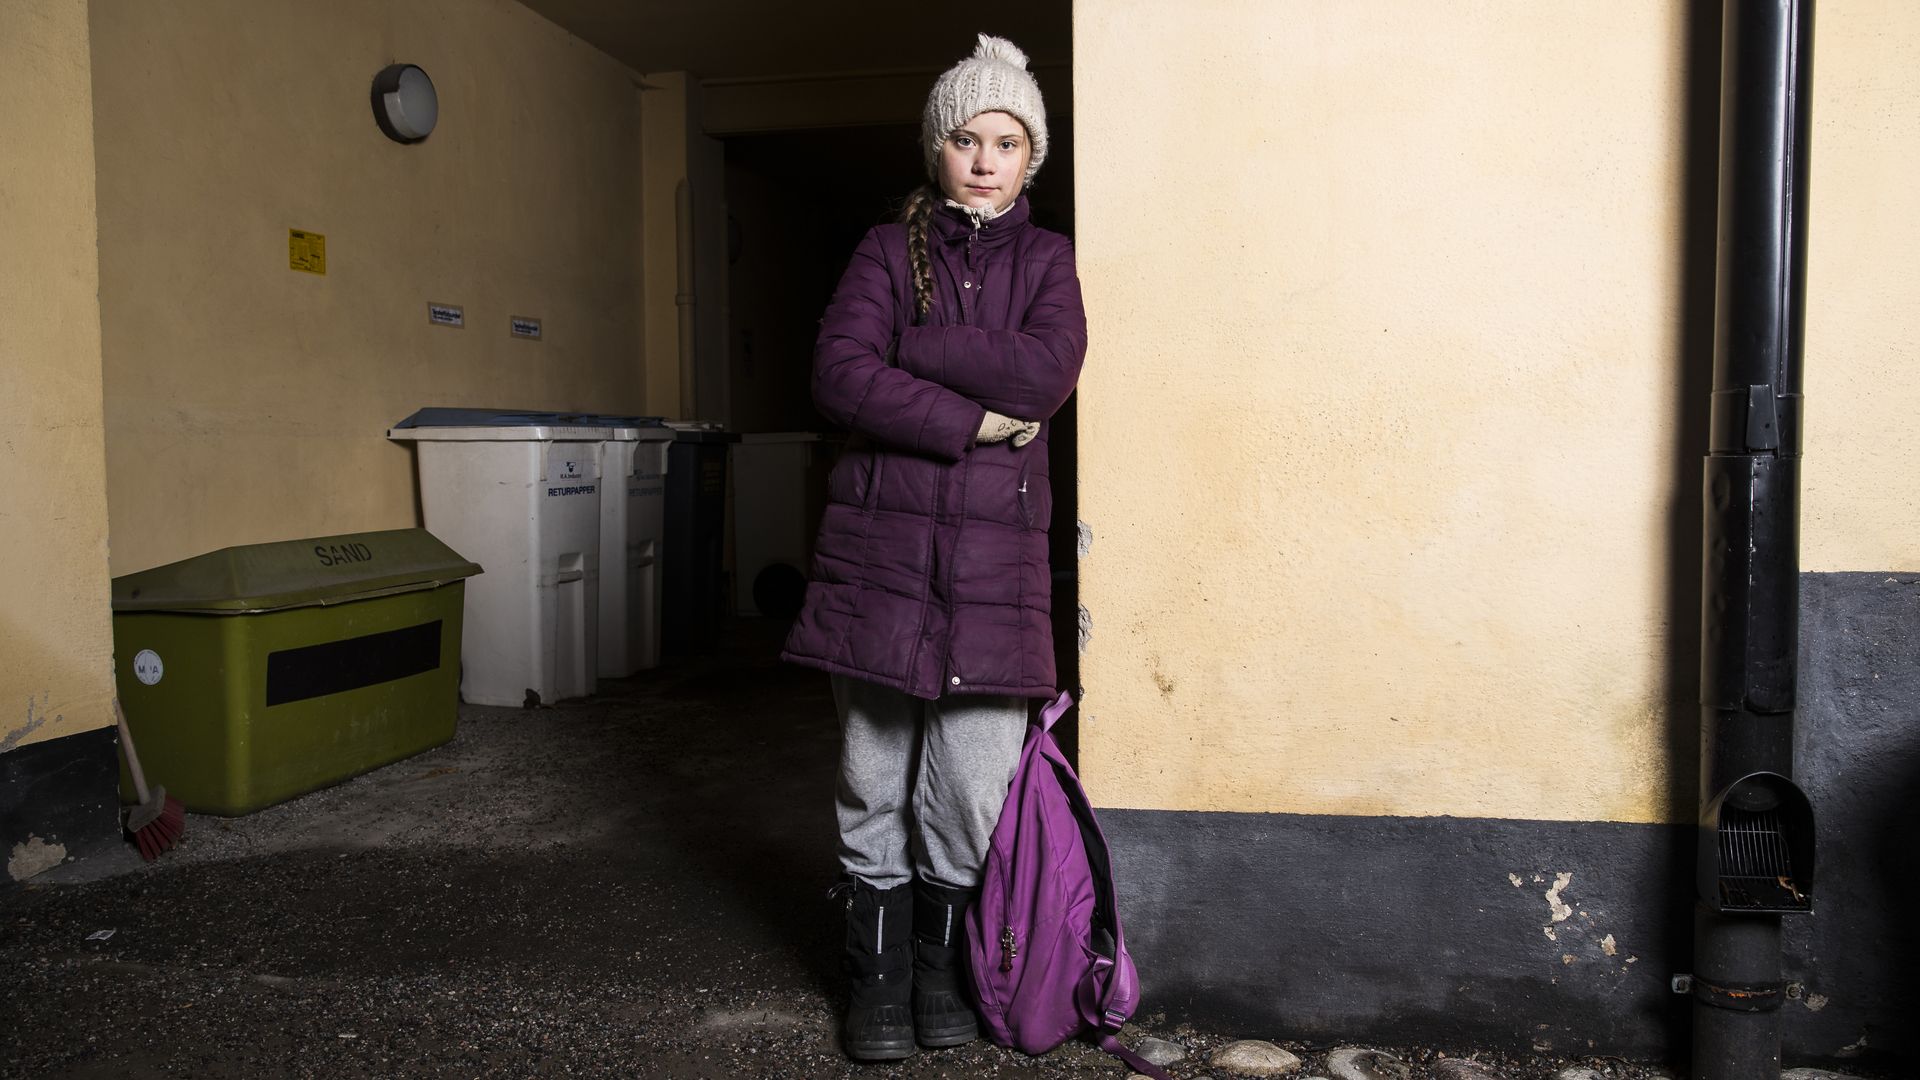 In this image, Greta stands in a puffy winter coat and hat while leaning against a wall, with a bookbag near her.